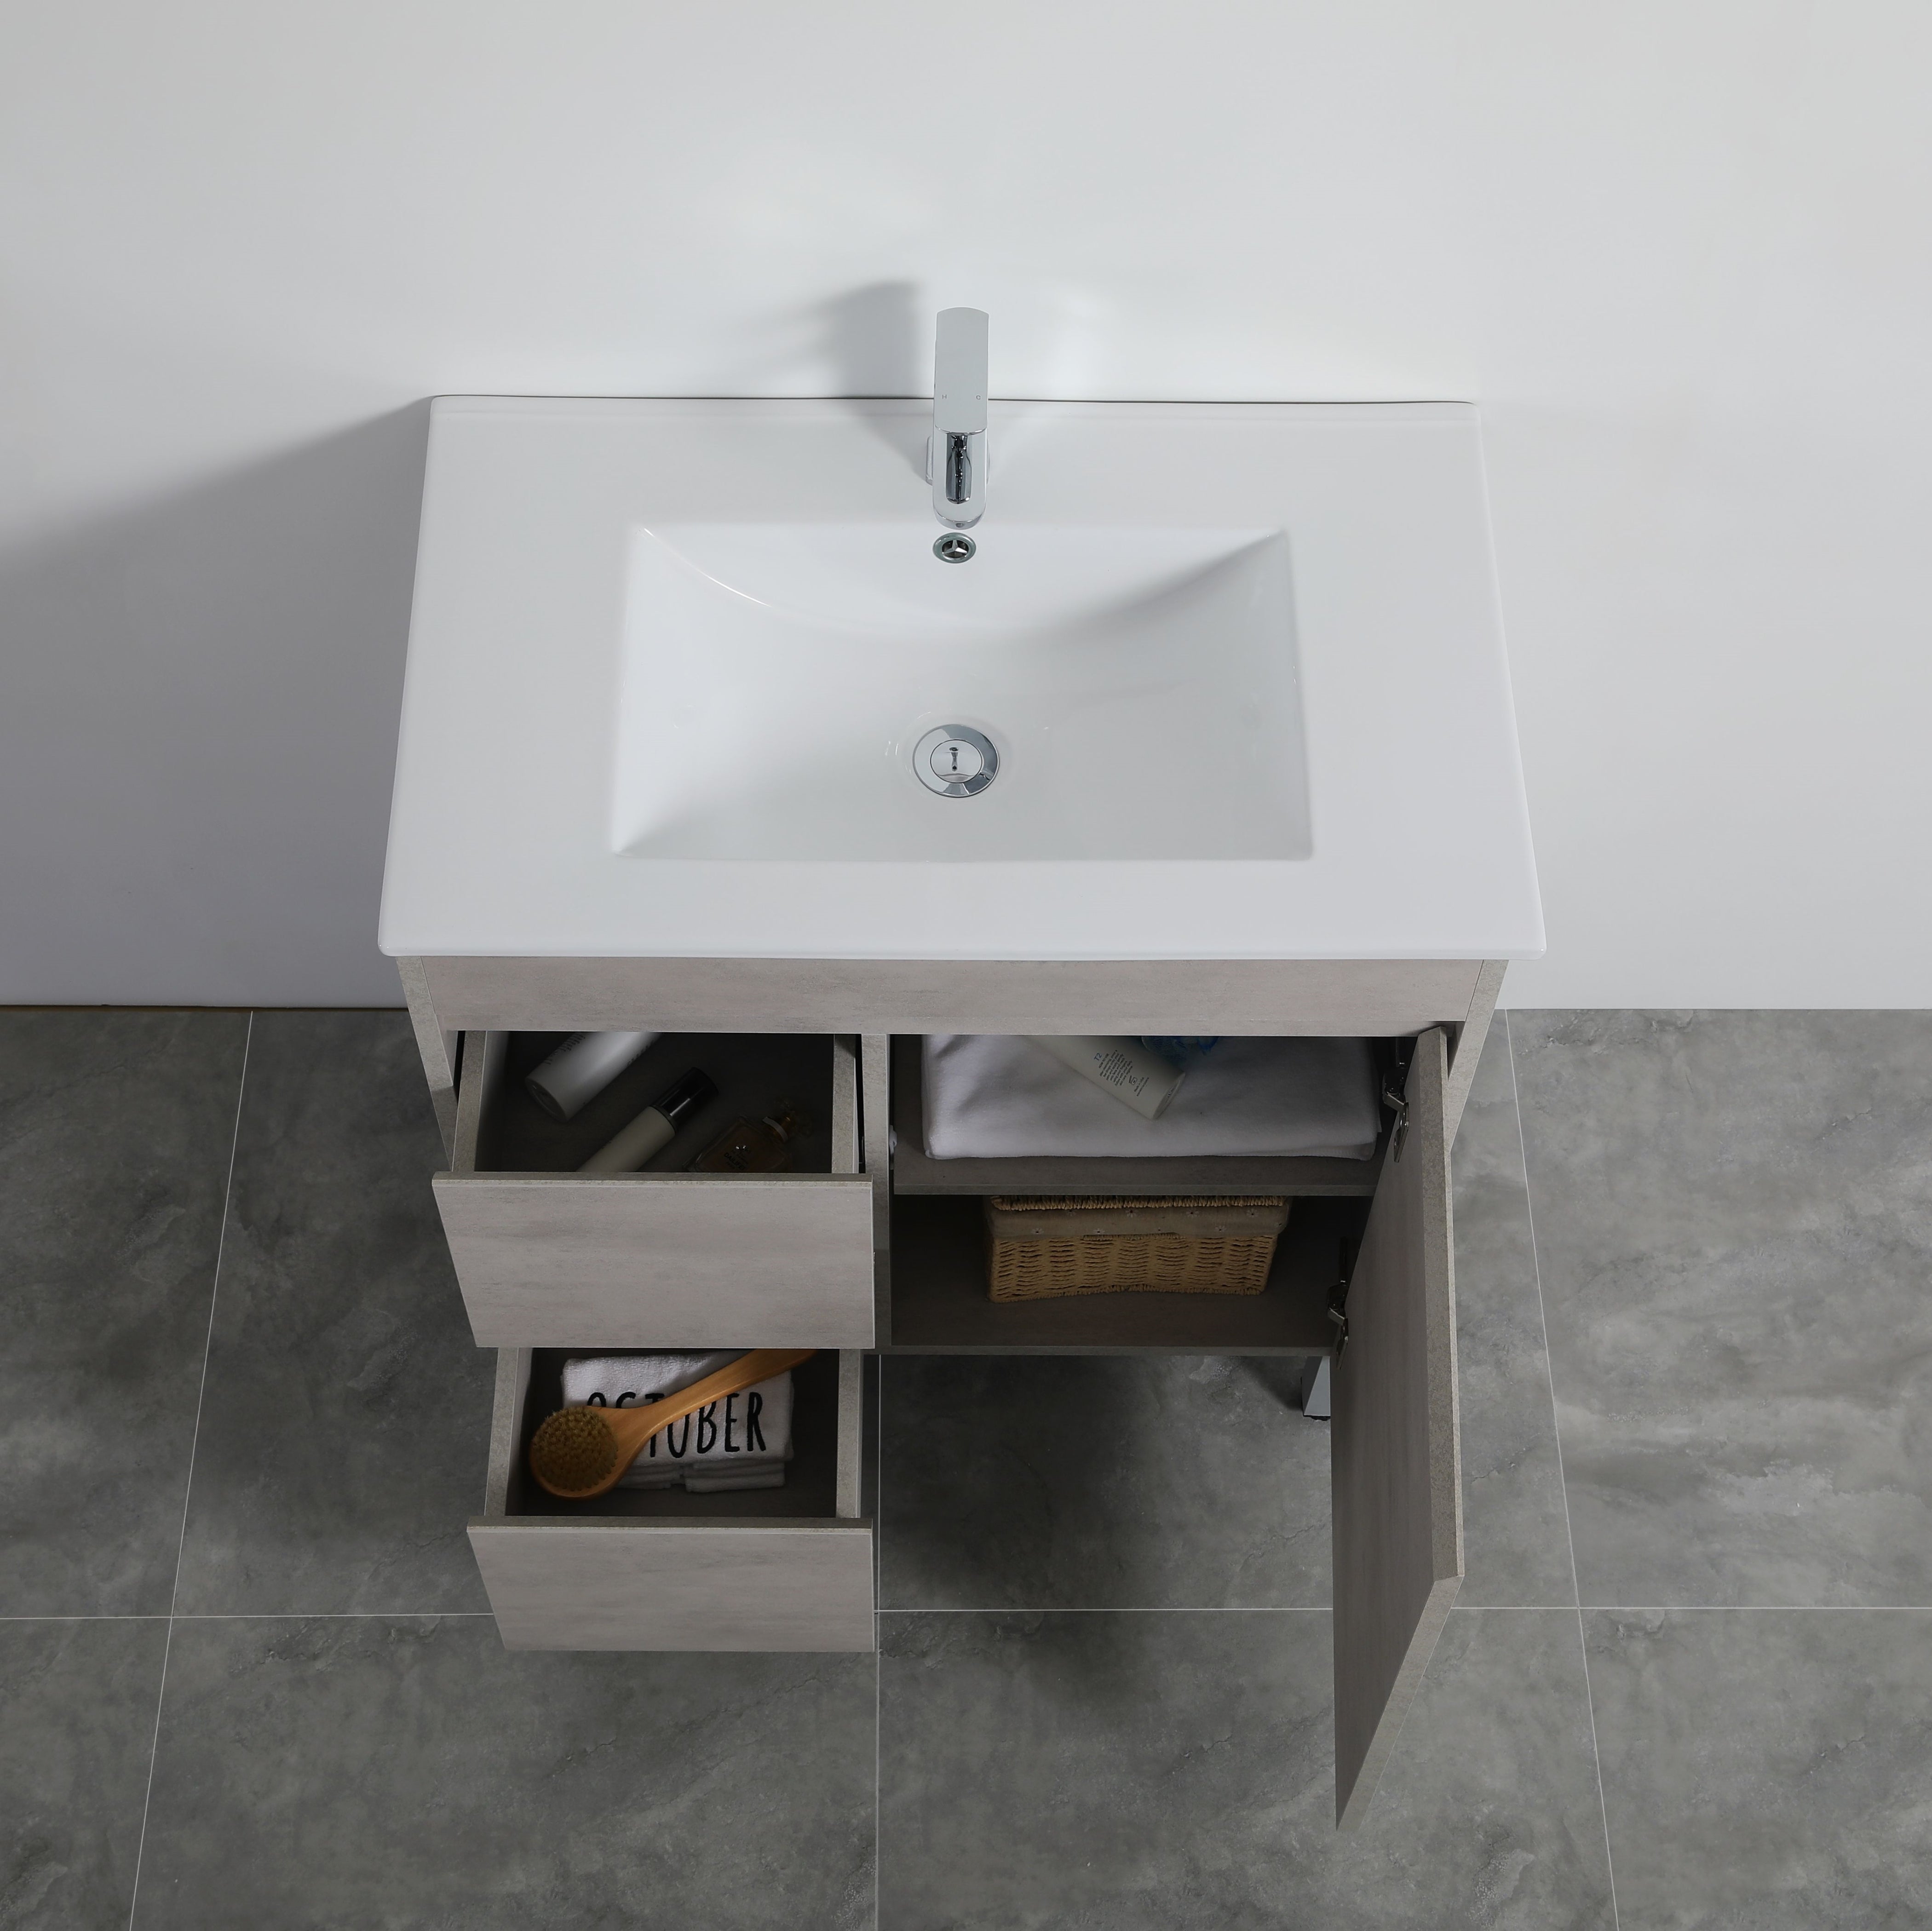 POSEIDON NOVA PLYWOOD CONCRETE GREY 750MM FLOOR STANDING VANITY (AVAILABLE IN LEFT HAND DRAWER AND RIGHT HAND DRAWER)